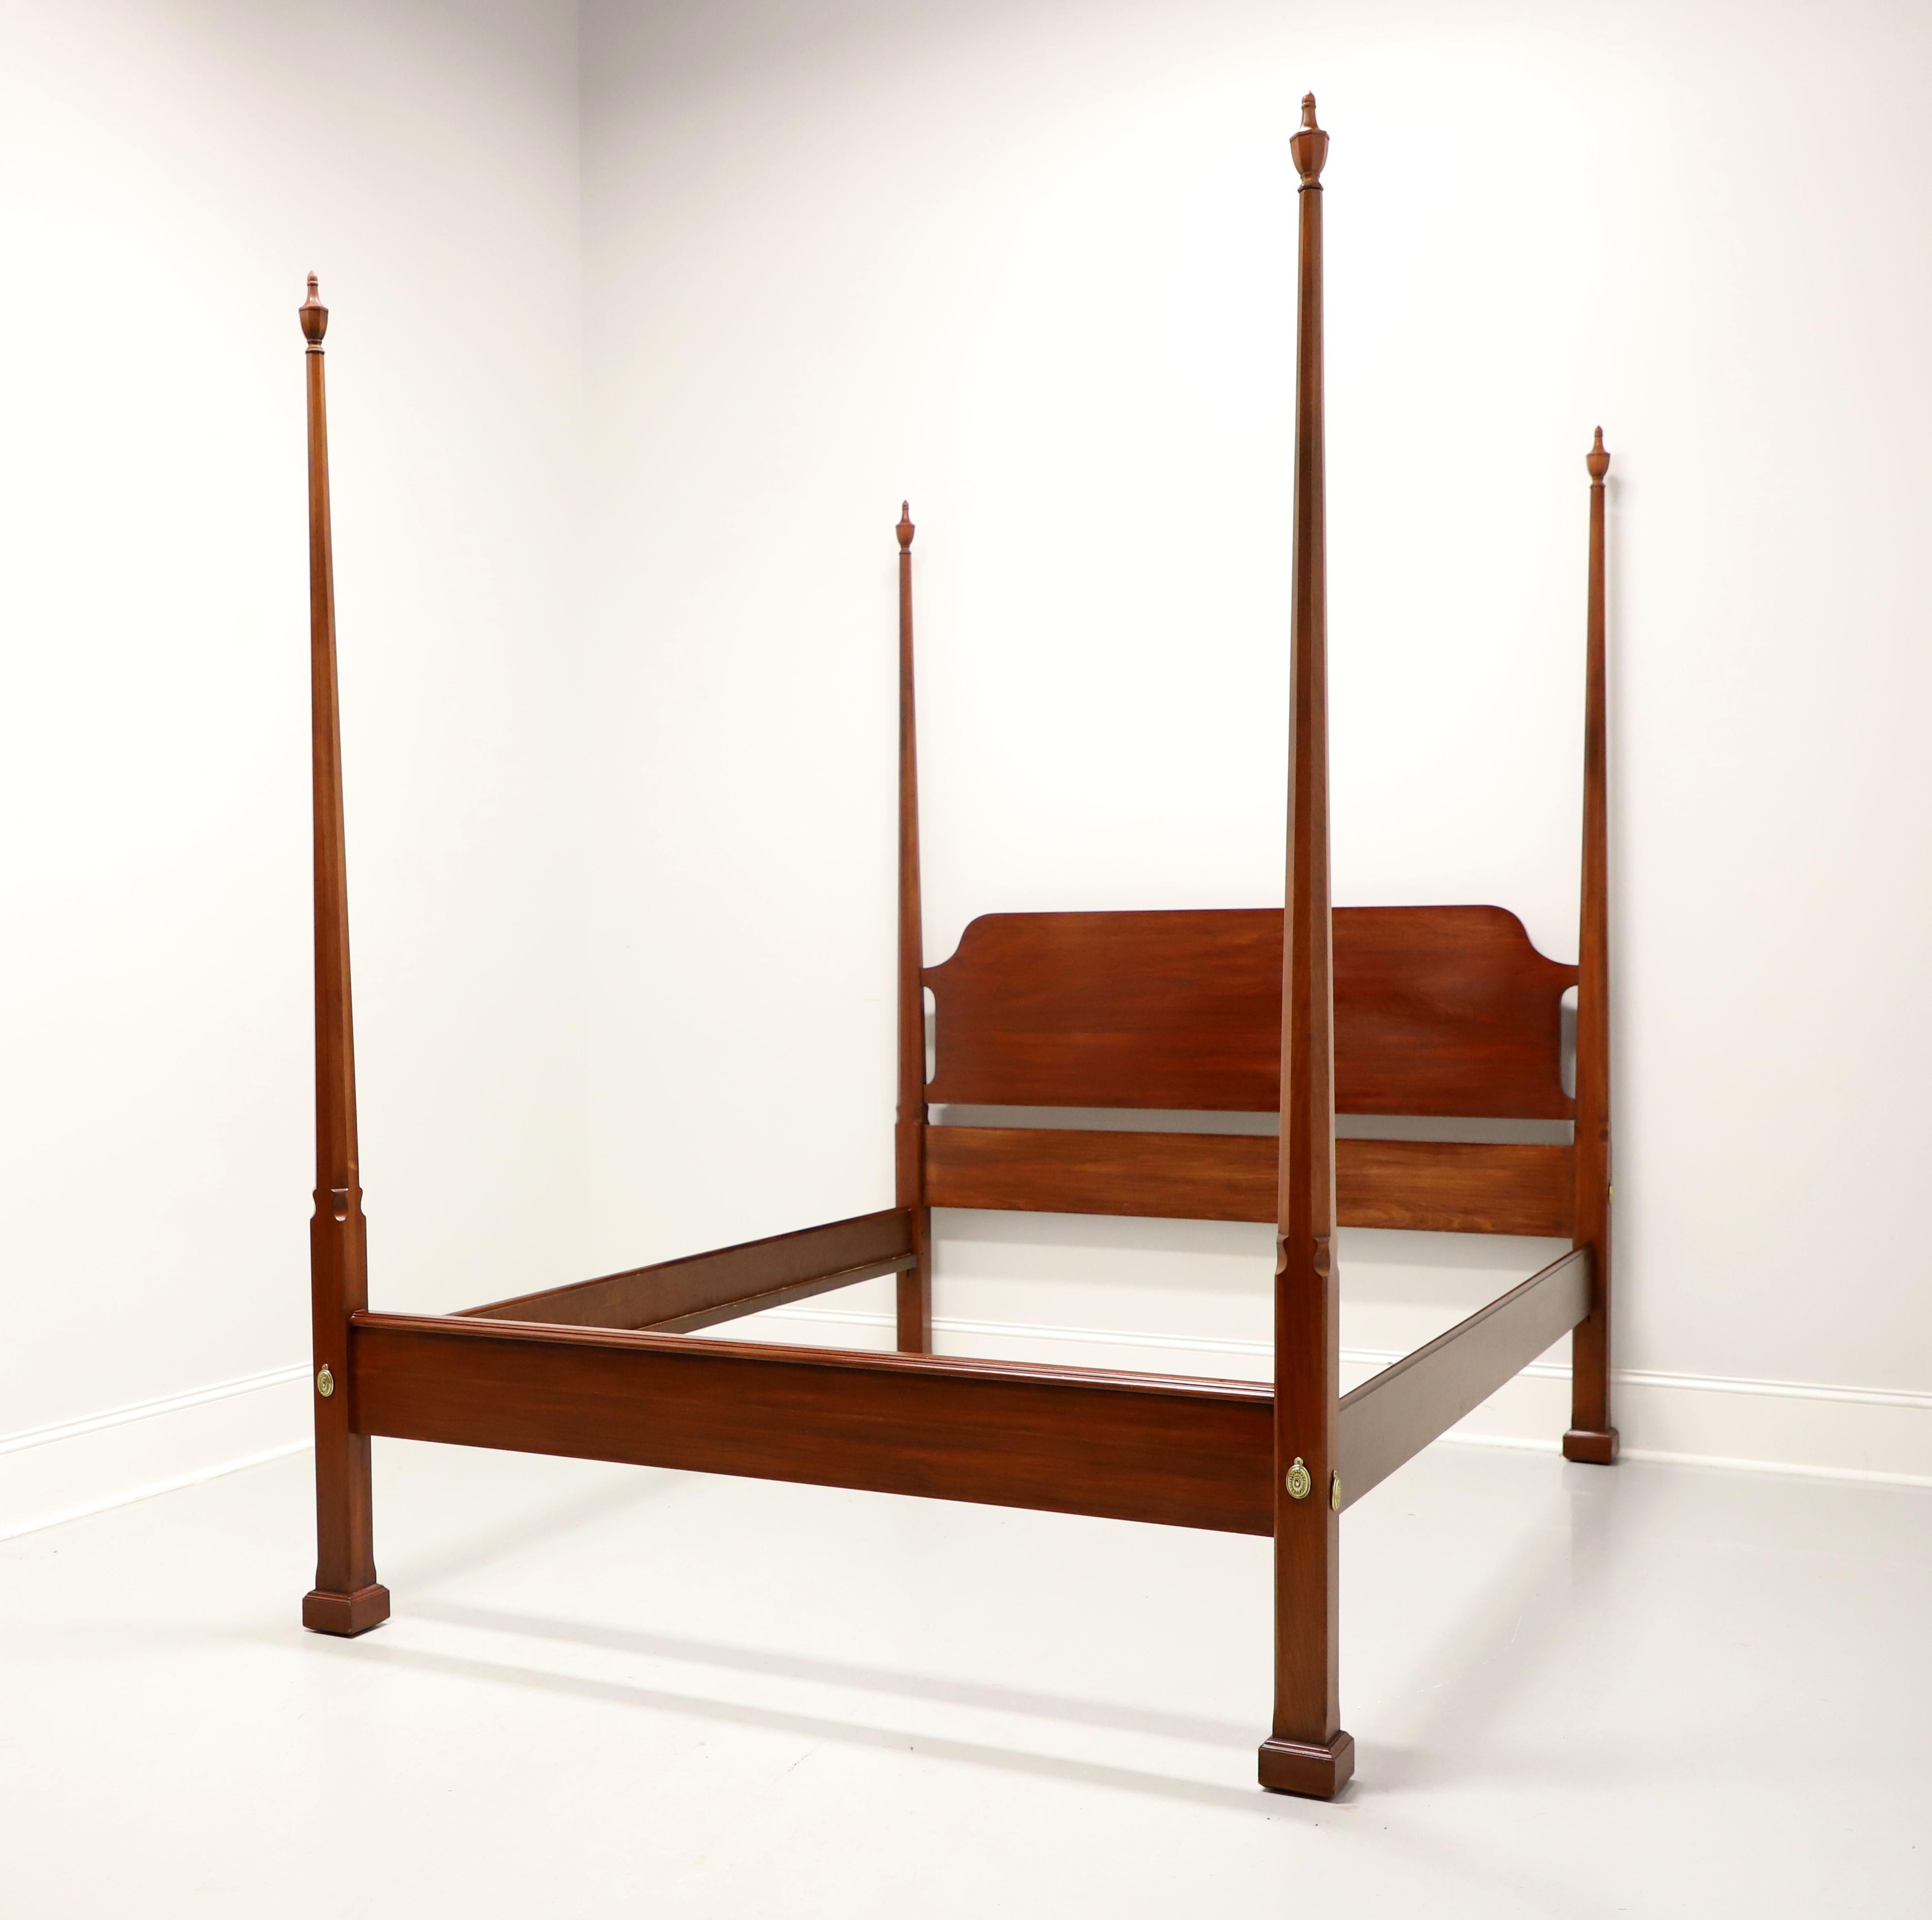 A Traditional style queen size pencil post bed by Henkel Harris, of Winchester, Virginia, USA. Solid wild black cherry wood with four pencil shaped posts with finials, brass covers to headboard & footboard, metal clip held side rails with wood